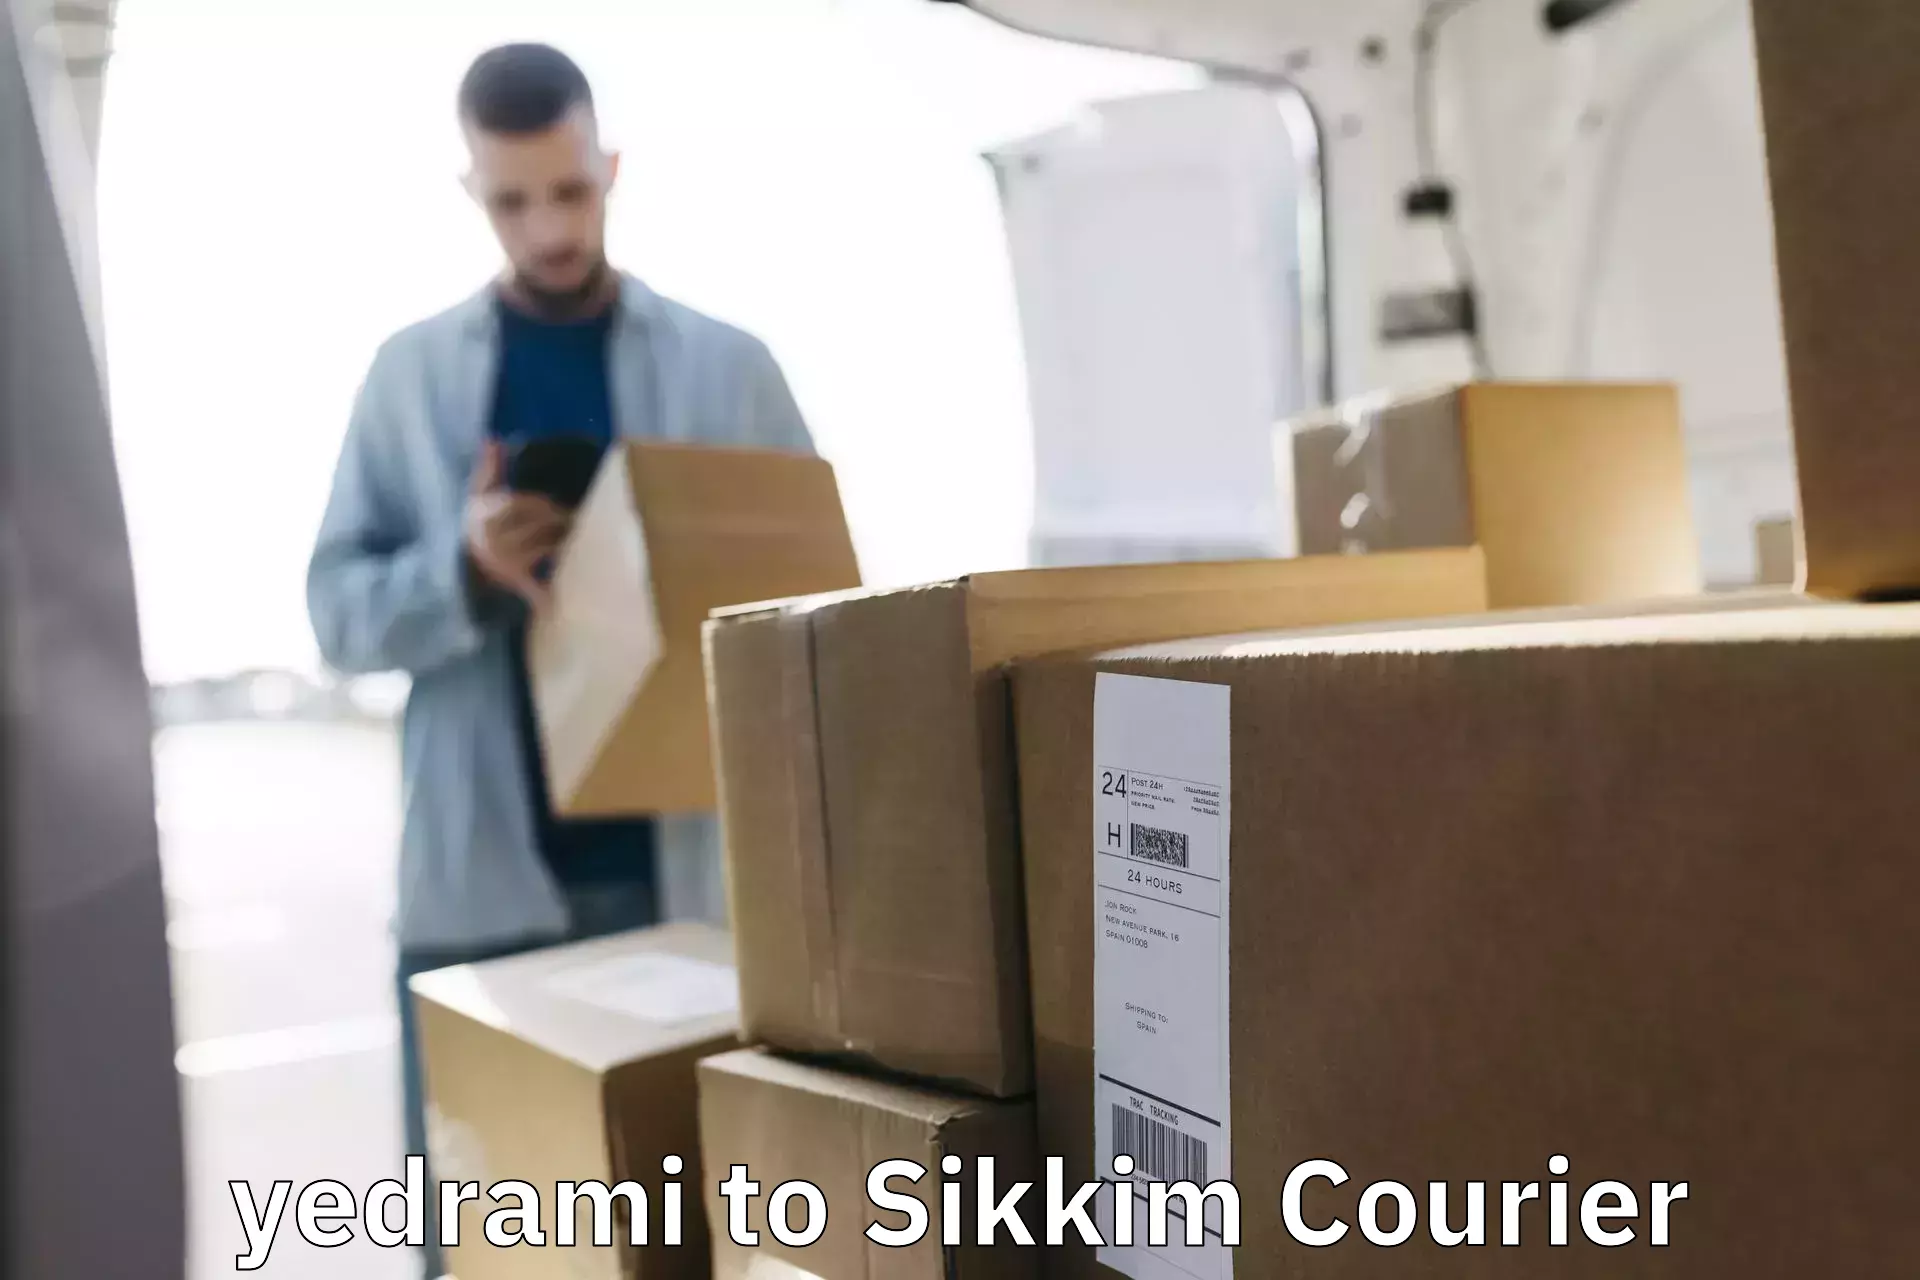 Efficient order fulfillment in yedrami to Ranipool